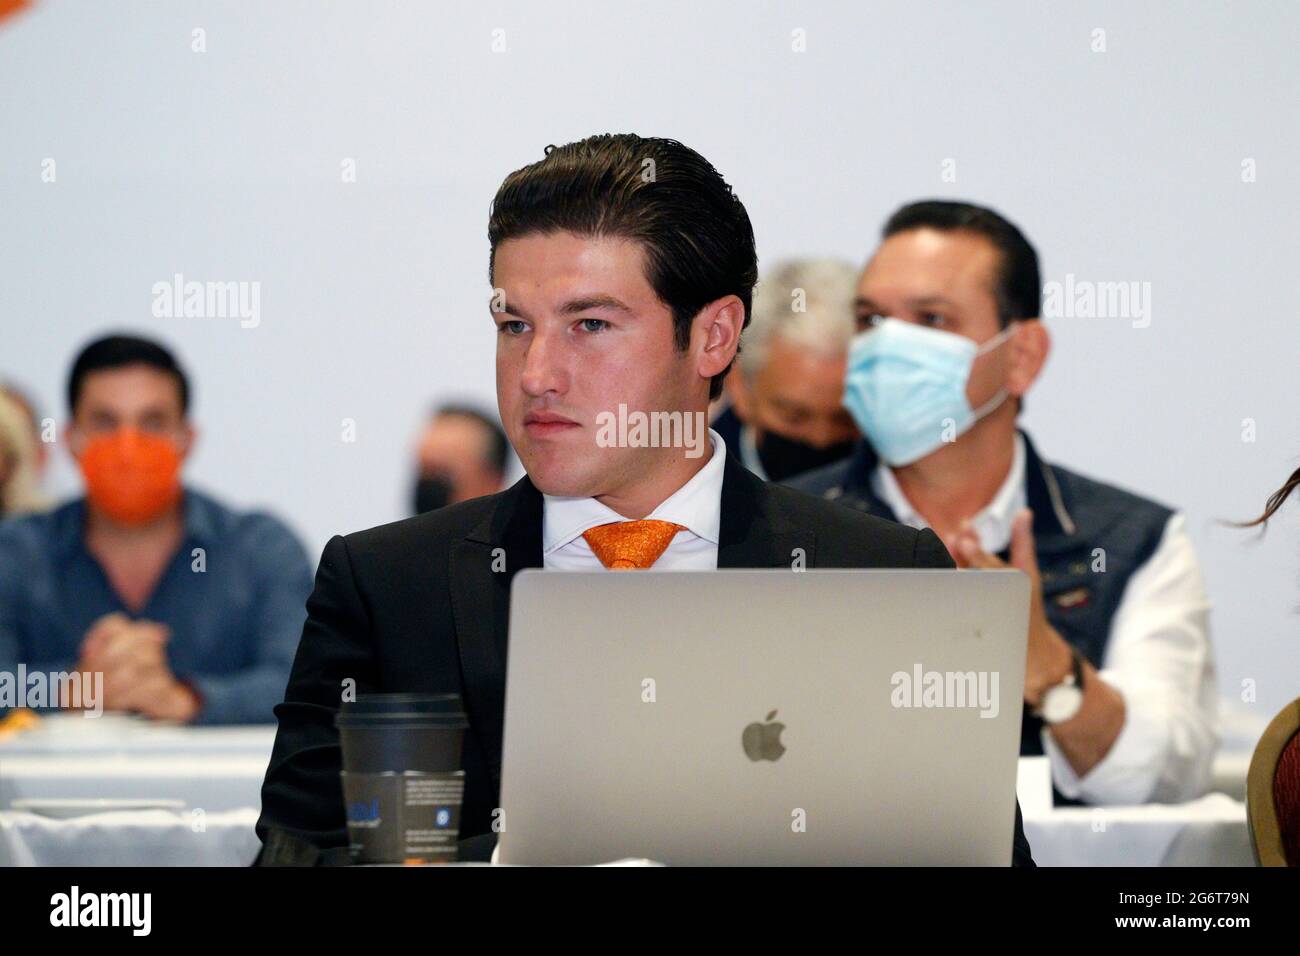 MEXICO CITY, MEXICO - JULY 5: The governor-elect of the state of Nuevo León, Samuel García during the XXI Session of the National Council on July 5, 2021 in Mexico City, Mexico. (Photo by Eyepix/Sipa USA) Stock Photo